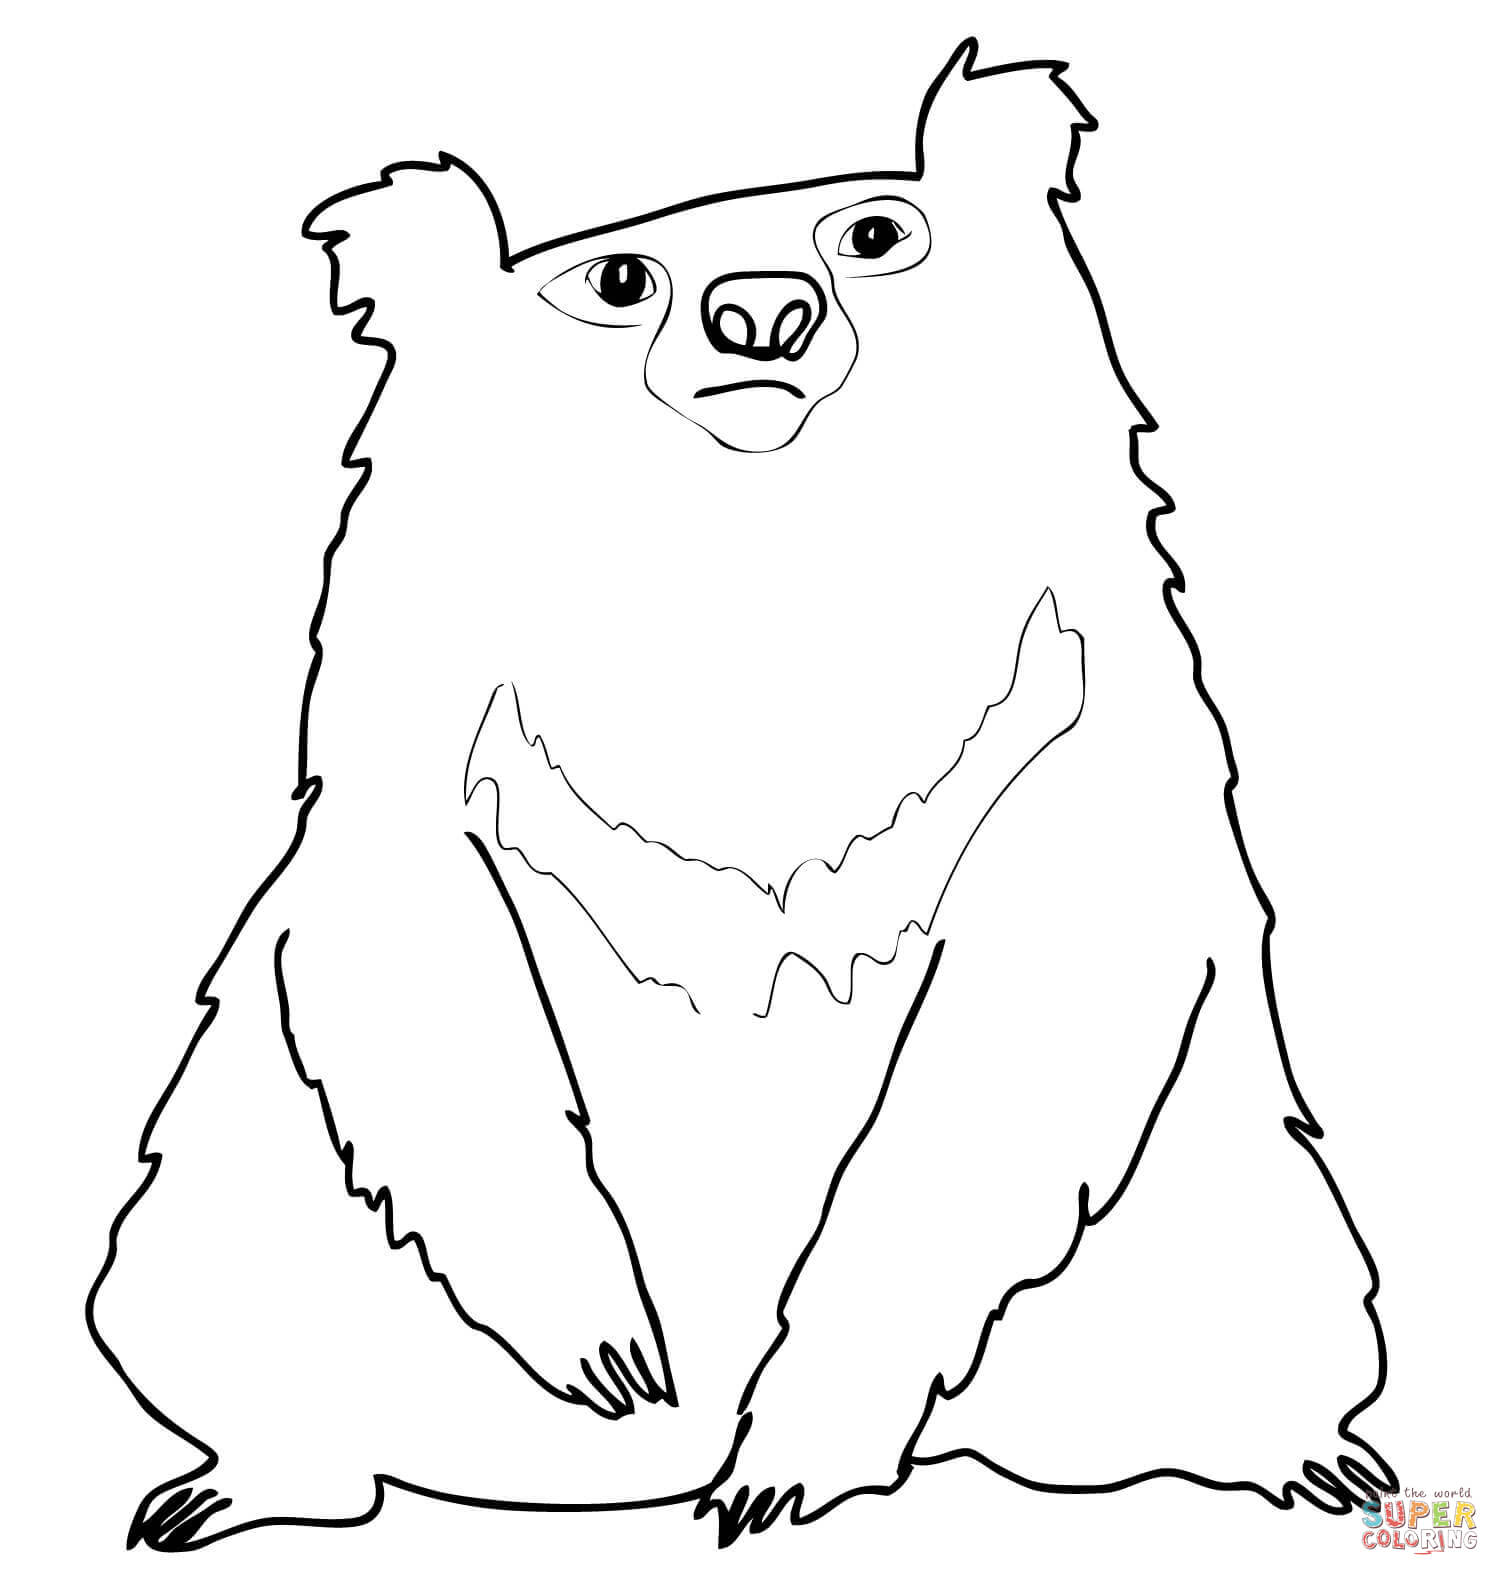 Spectacled Bear coloring #5, Download drawings